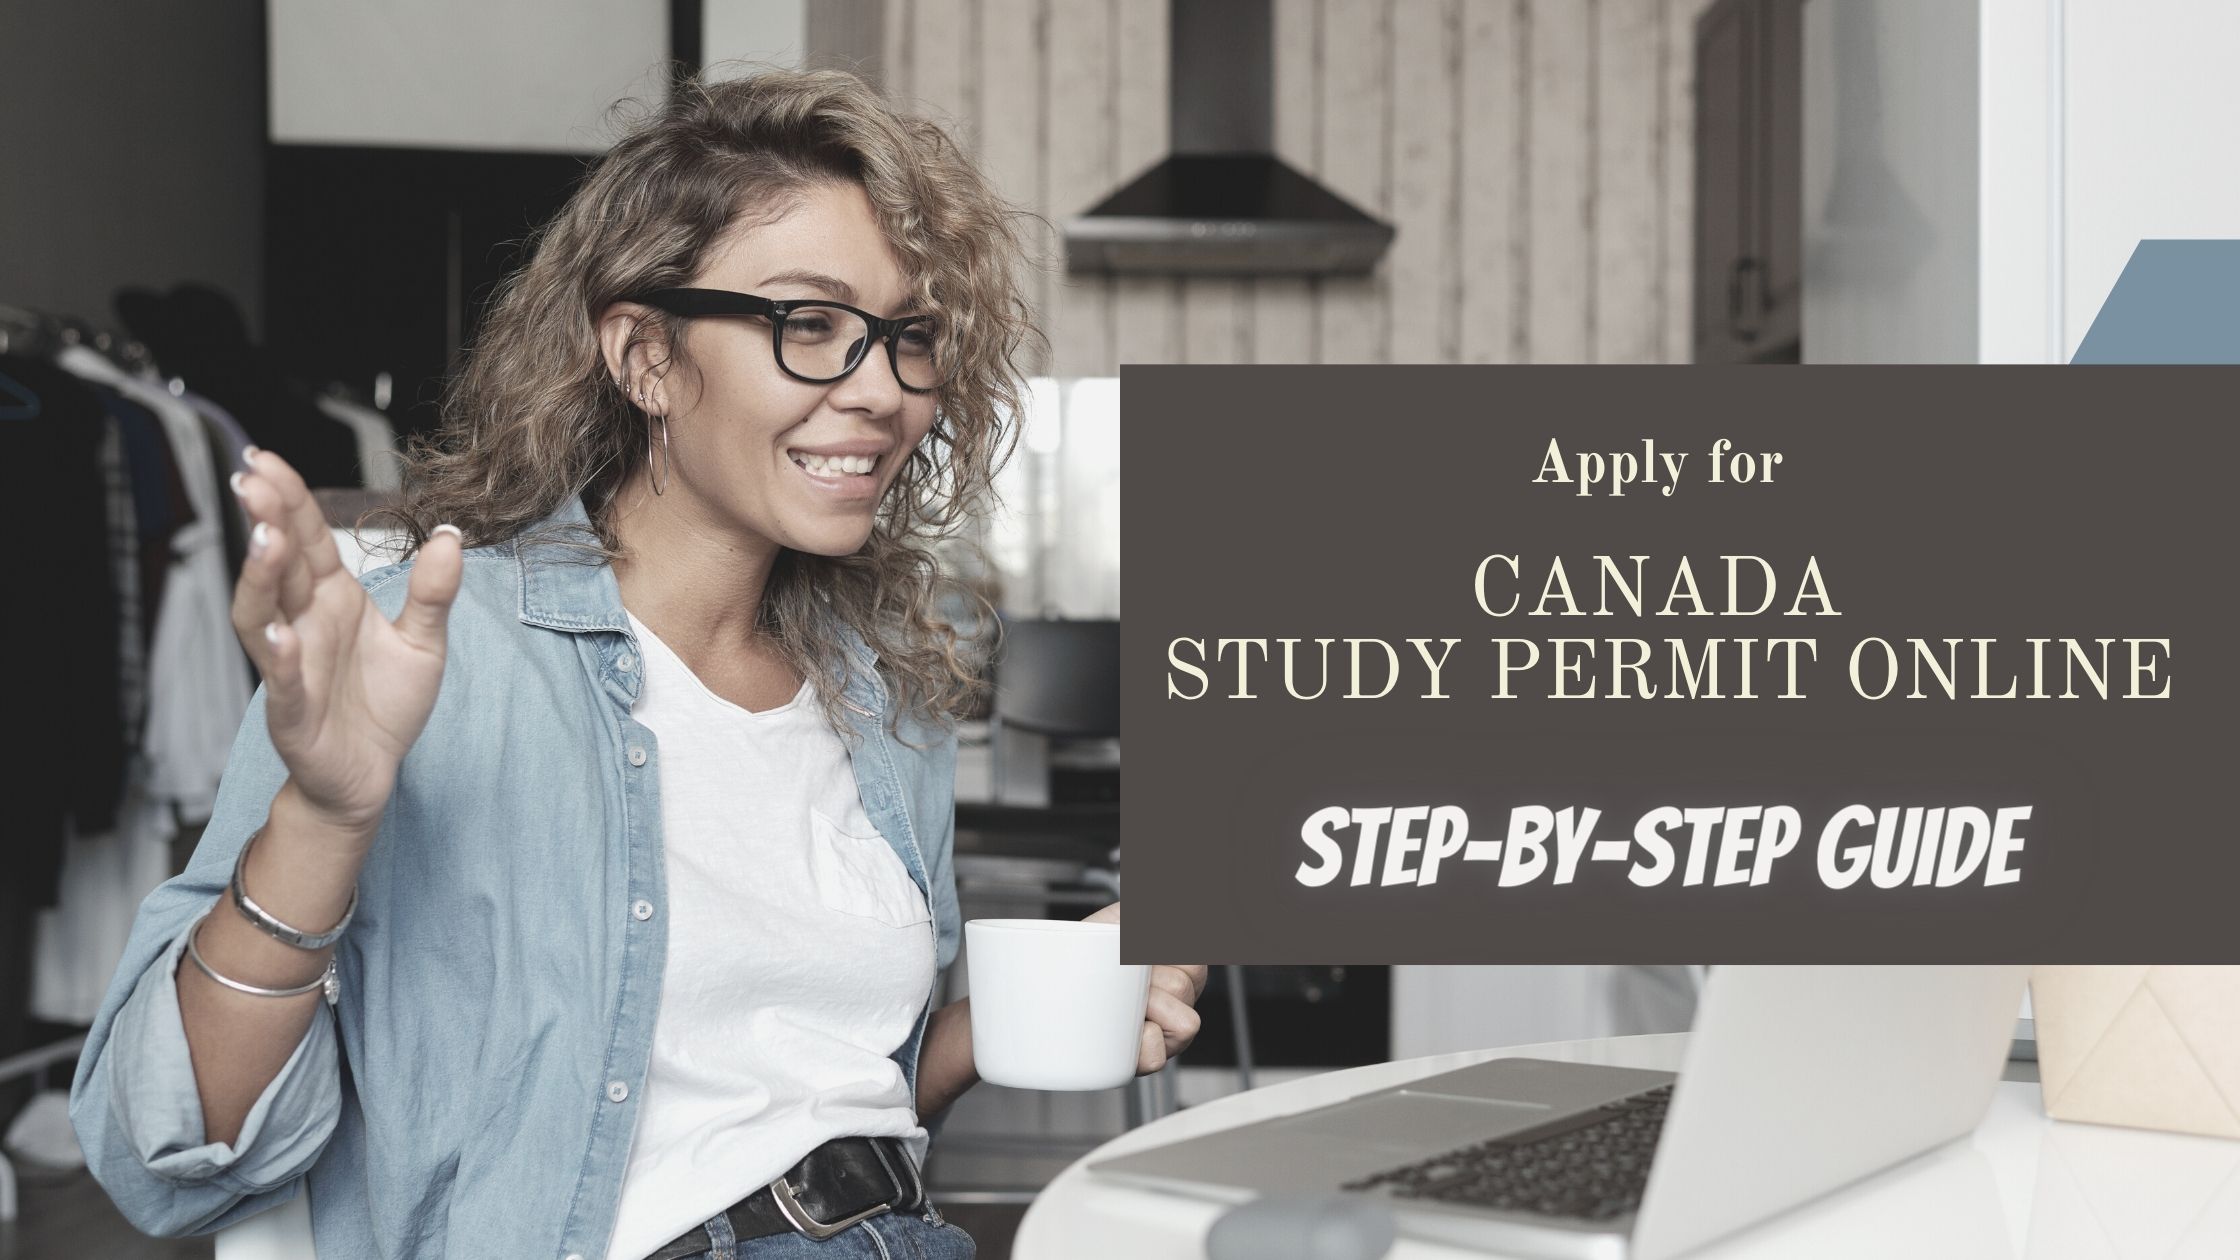 Apply for Canada study permit online in 2021: Step by Step